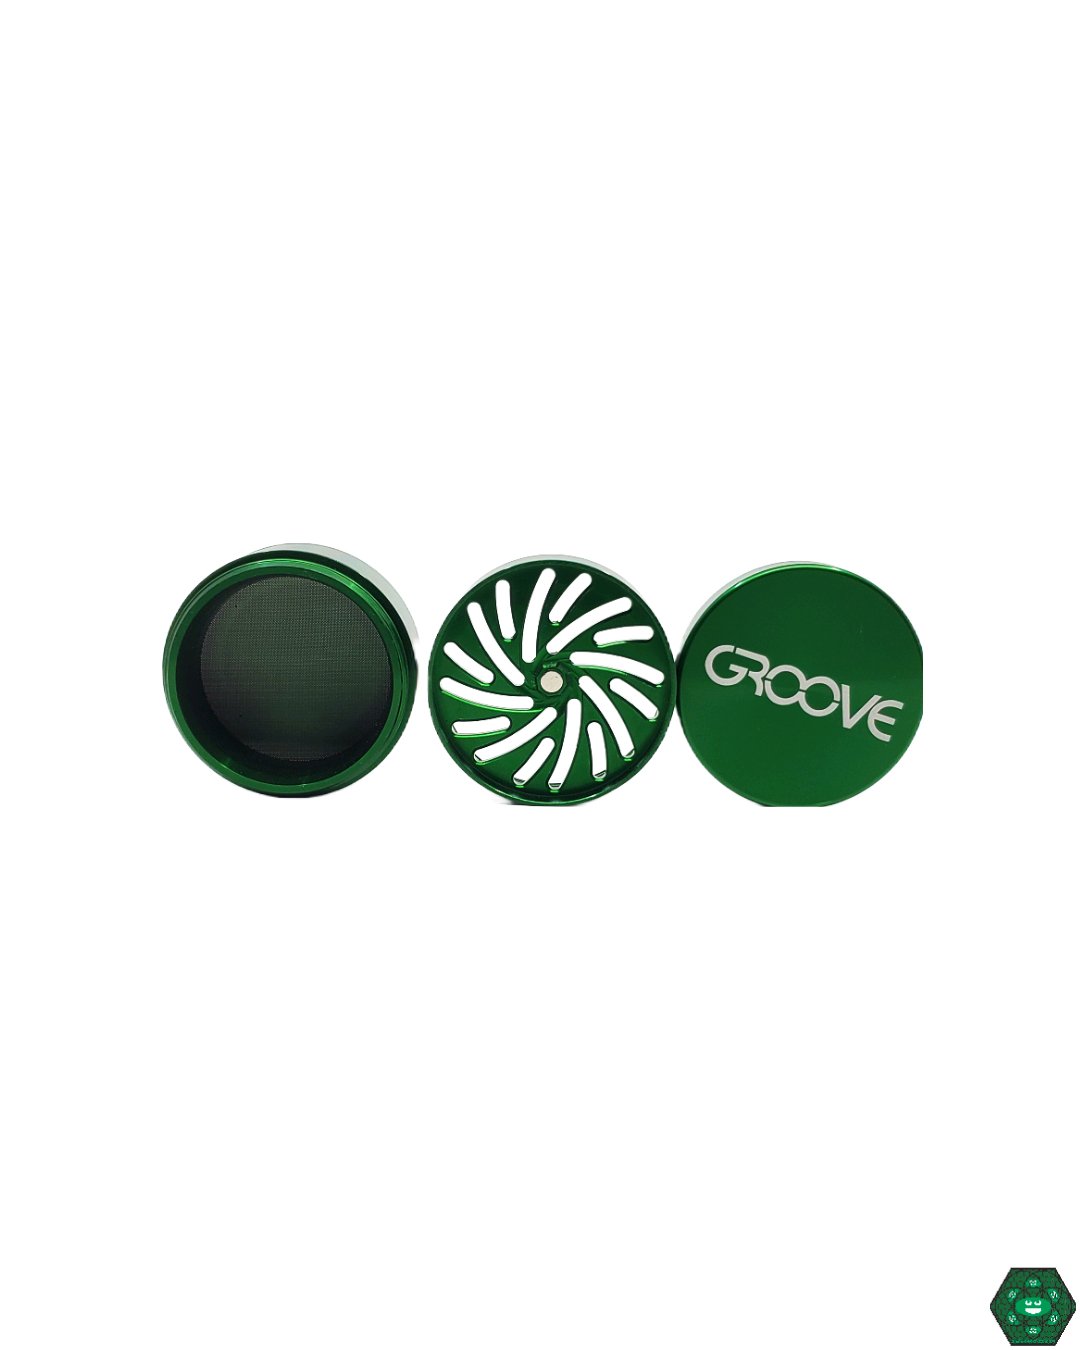 Groove - 4pc Grinder - @Groove - HG